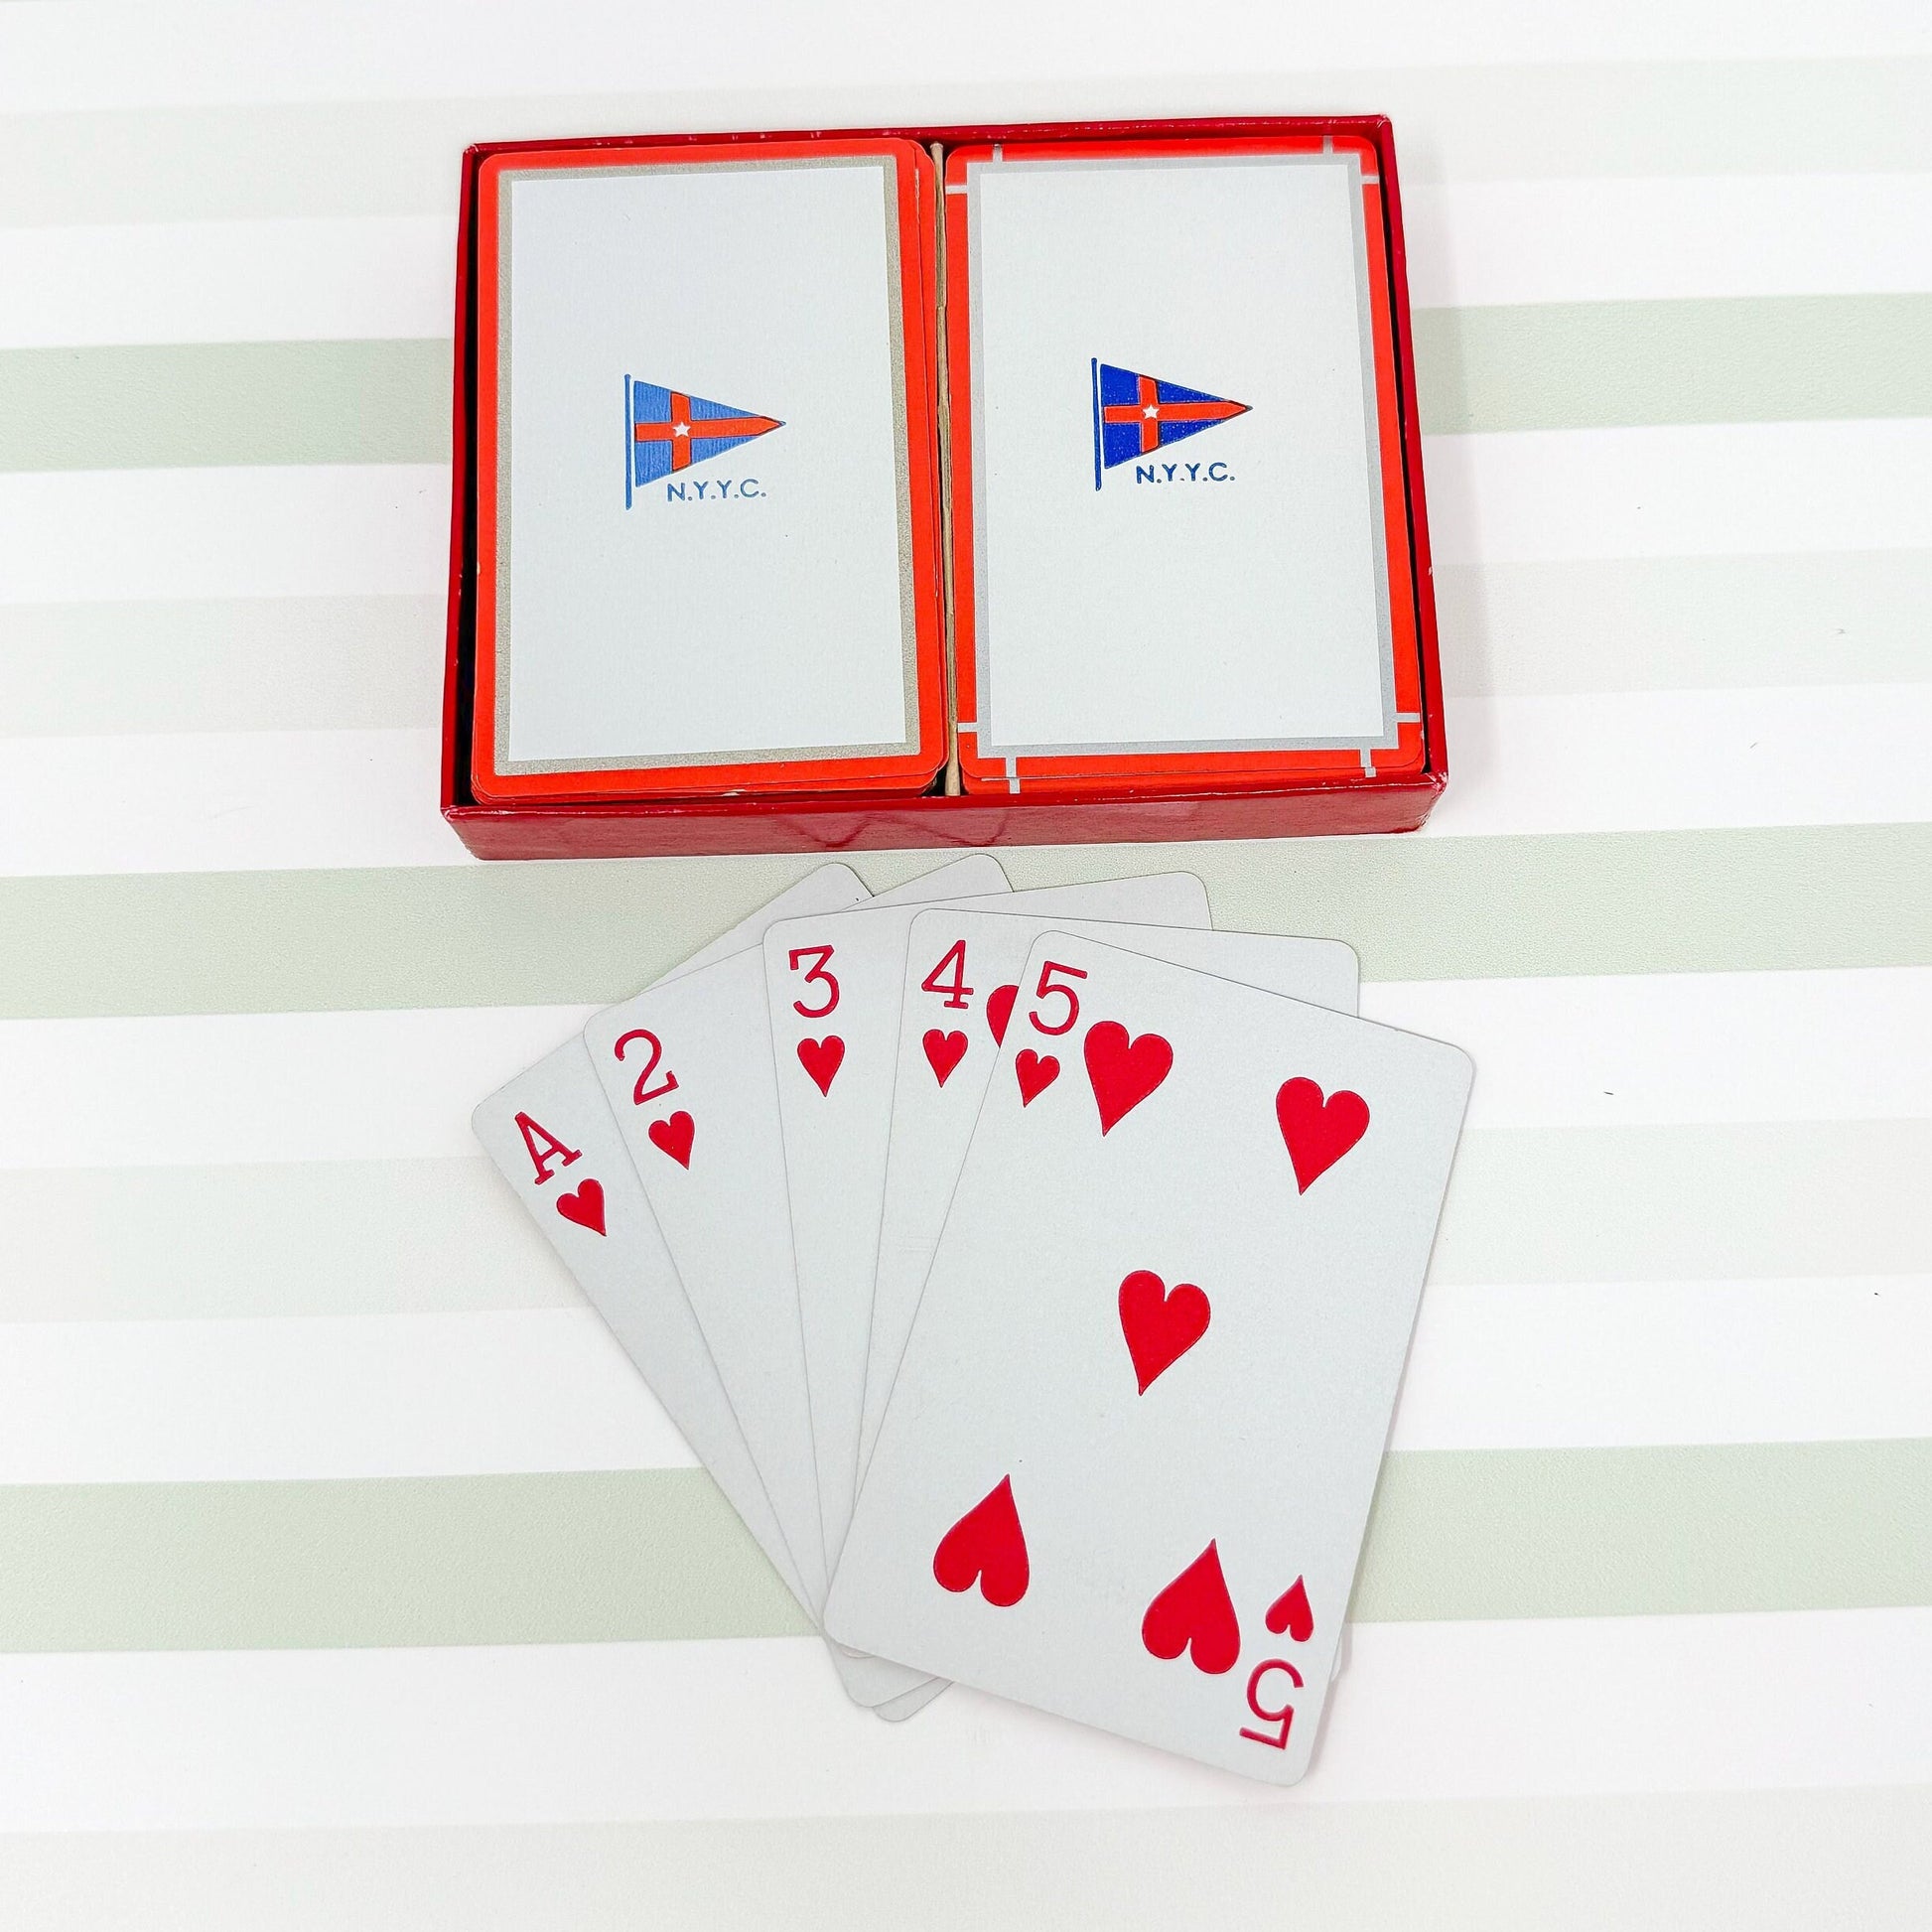 Rare Set of New York Yacht Club Playing Cards